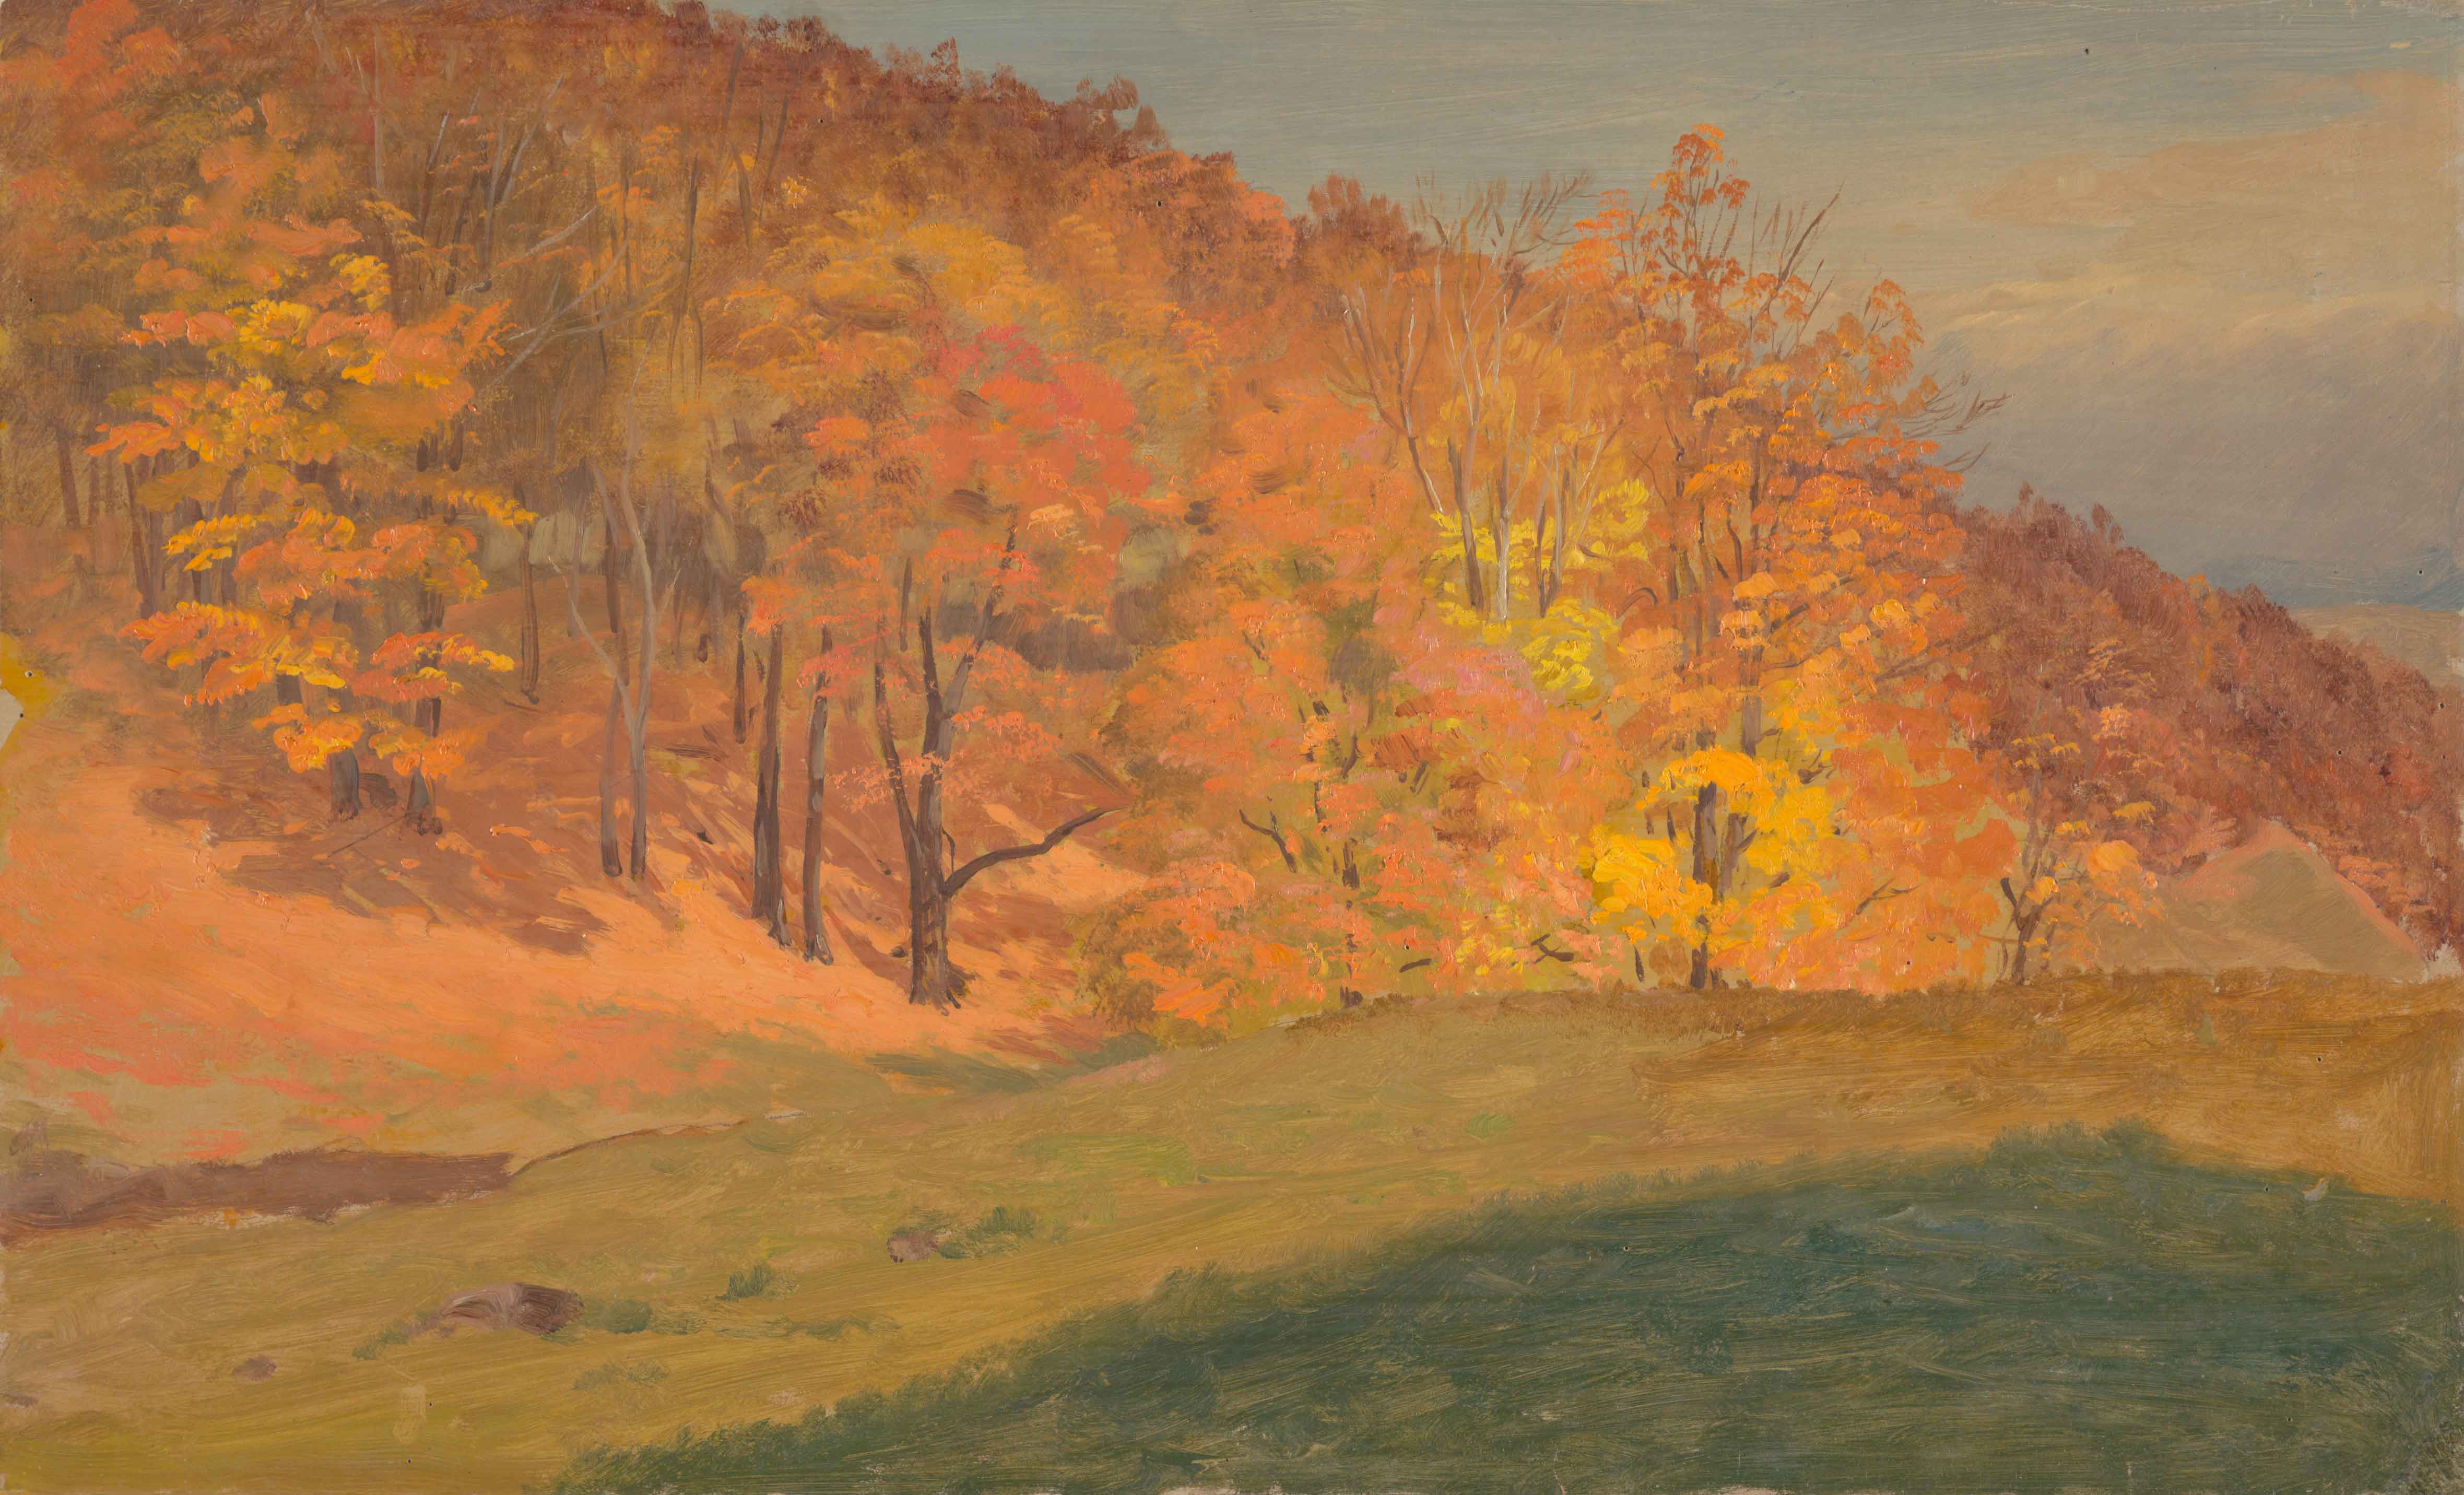 Painting of a line of trees with orange leaves behind a grassy slope